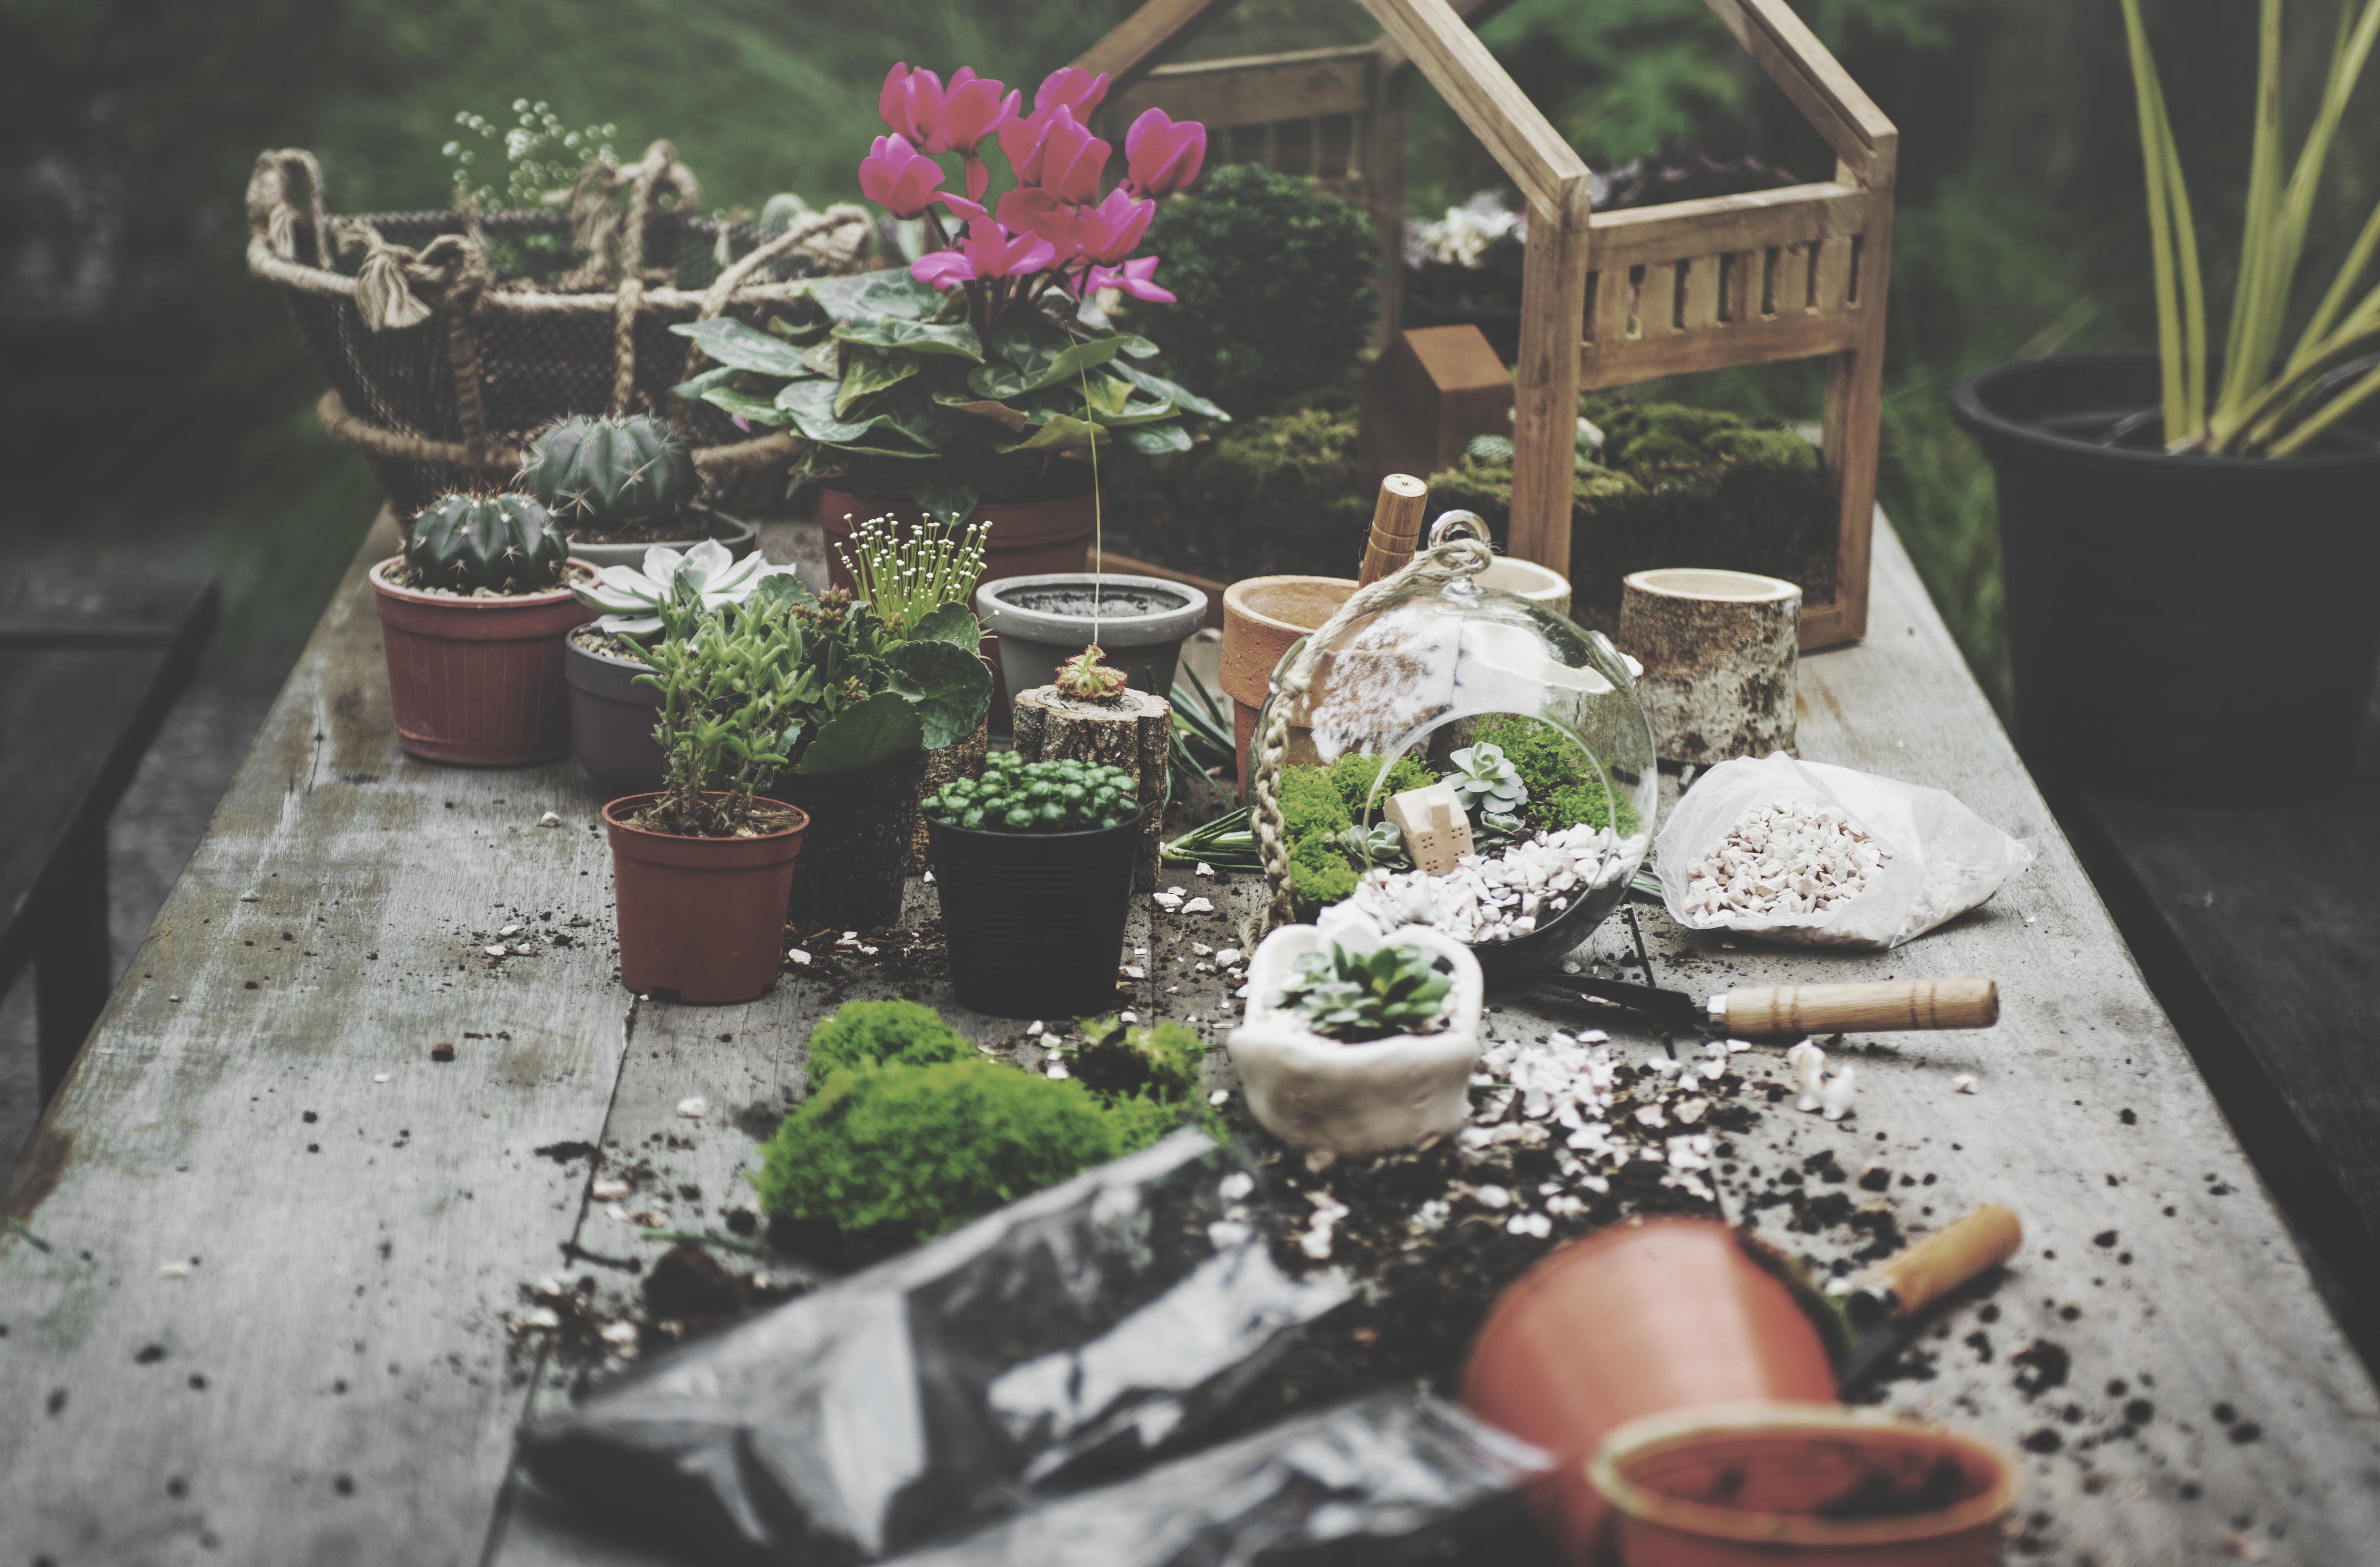 A table covered in plants and garden supplies. Image by rawpixel.com on Freepik